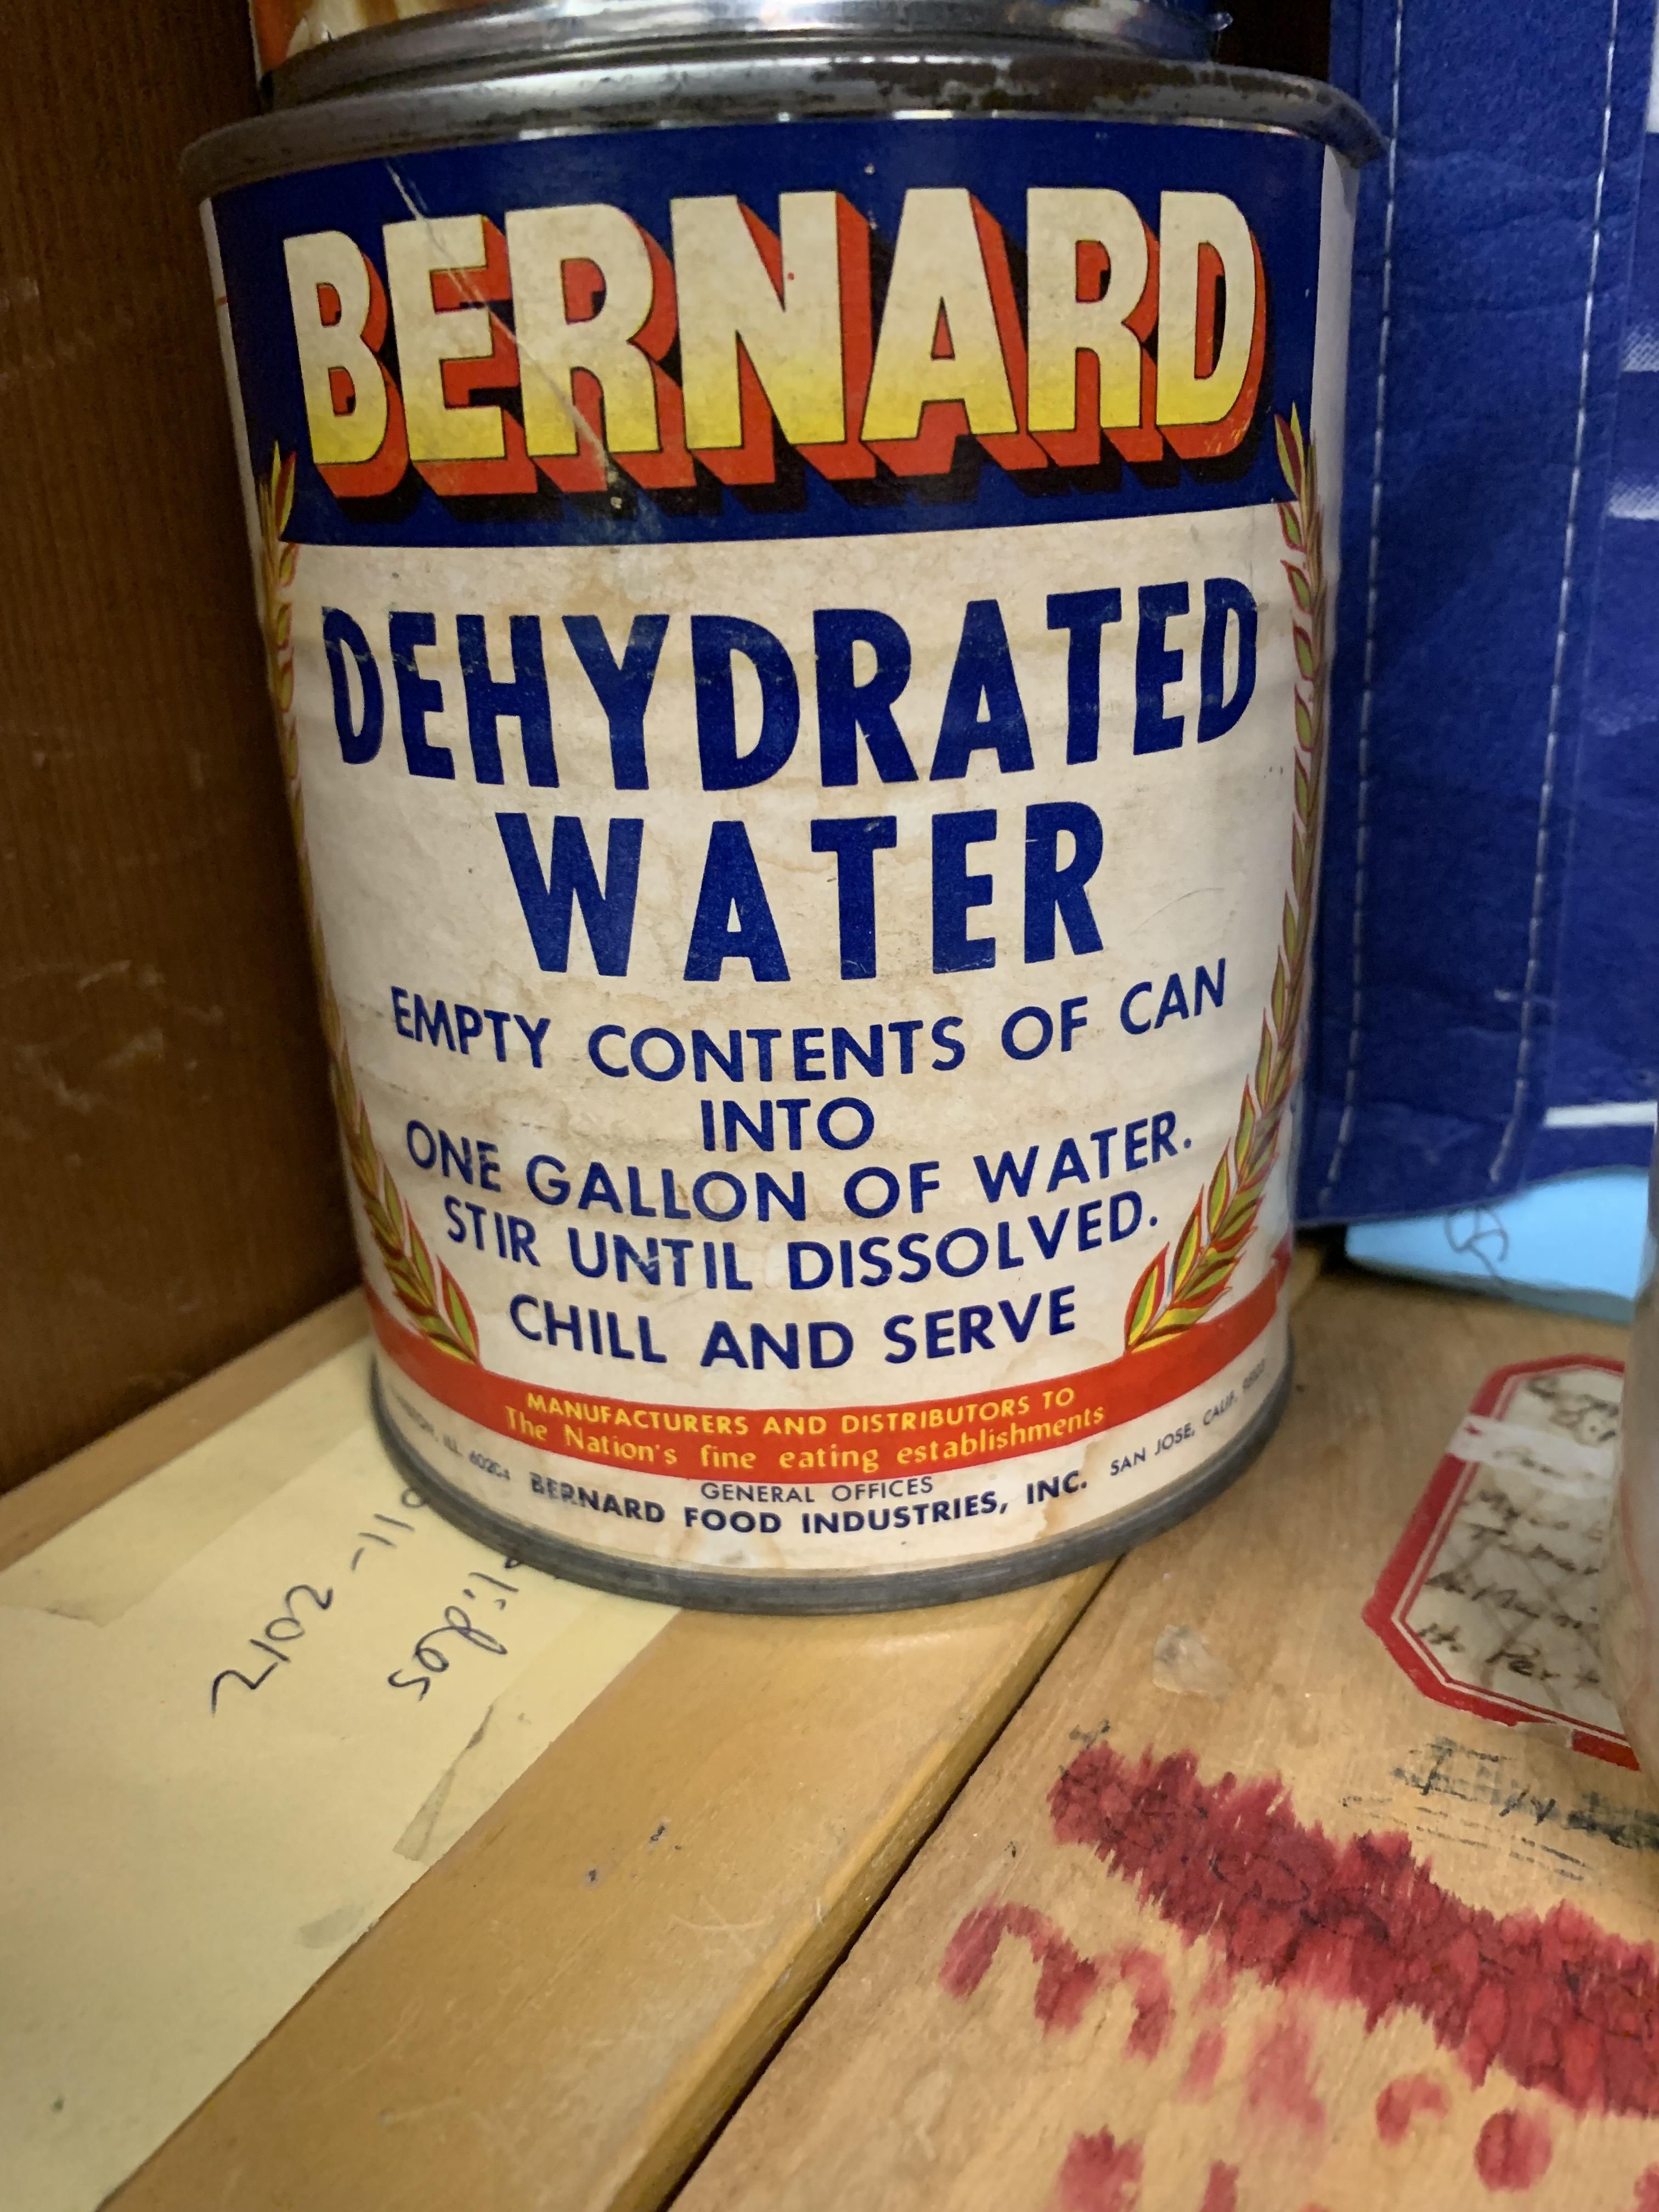 Found a can of dehydrated water